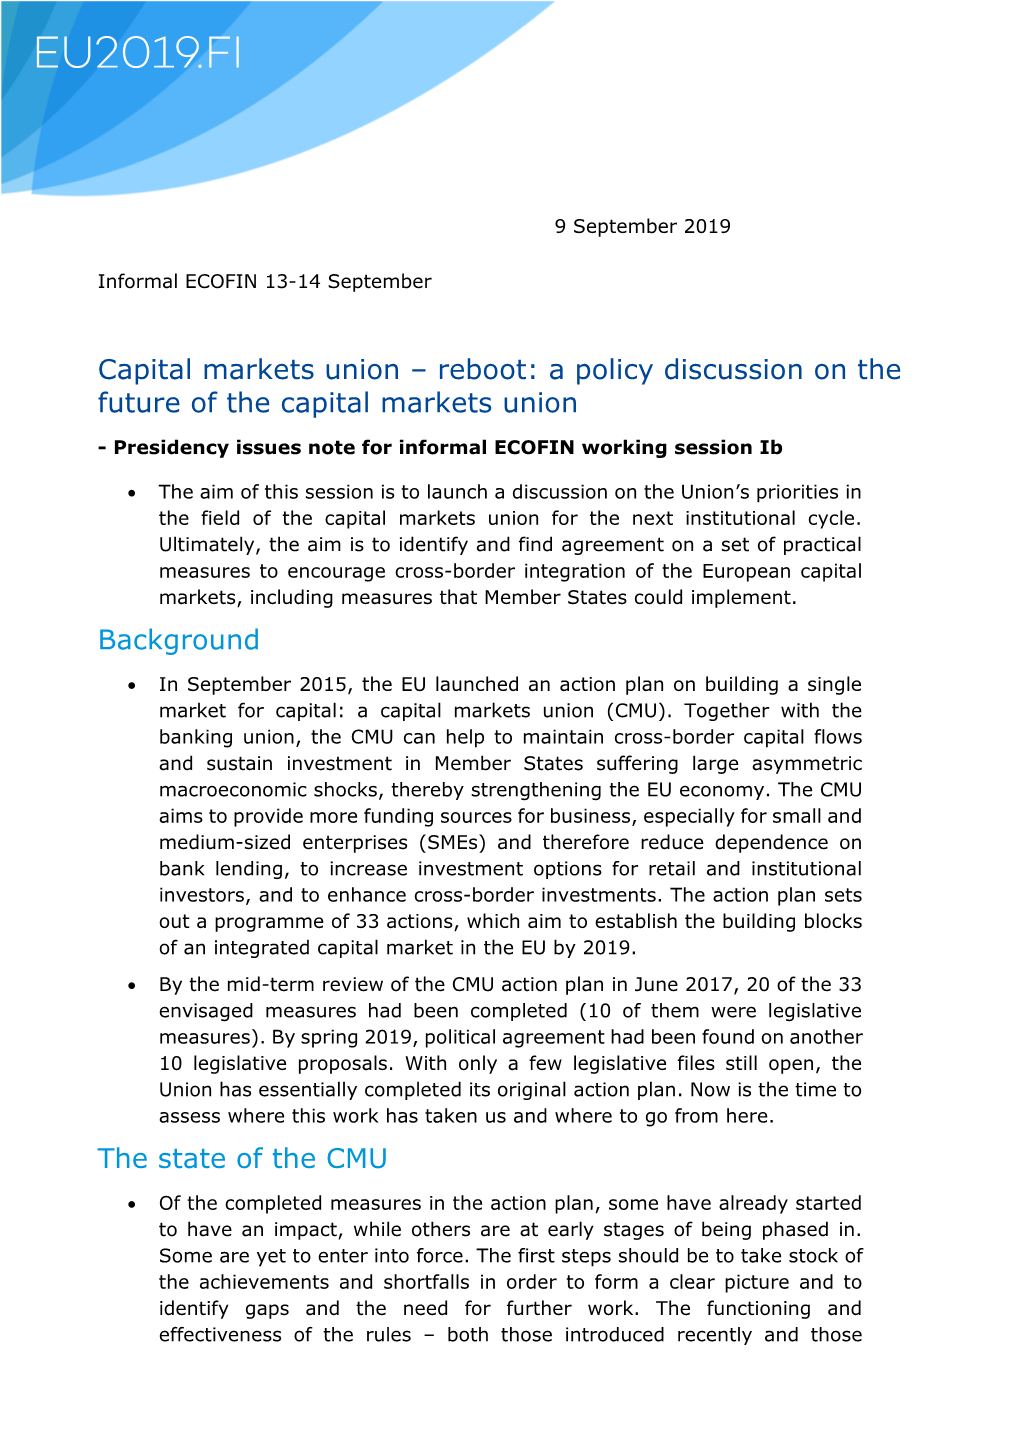 Capital Markets Union – Reboot: a Policy Discussion on the Future of the Capital Markets Union